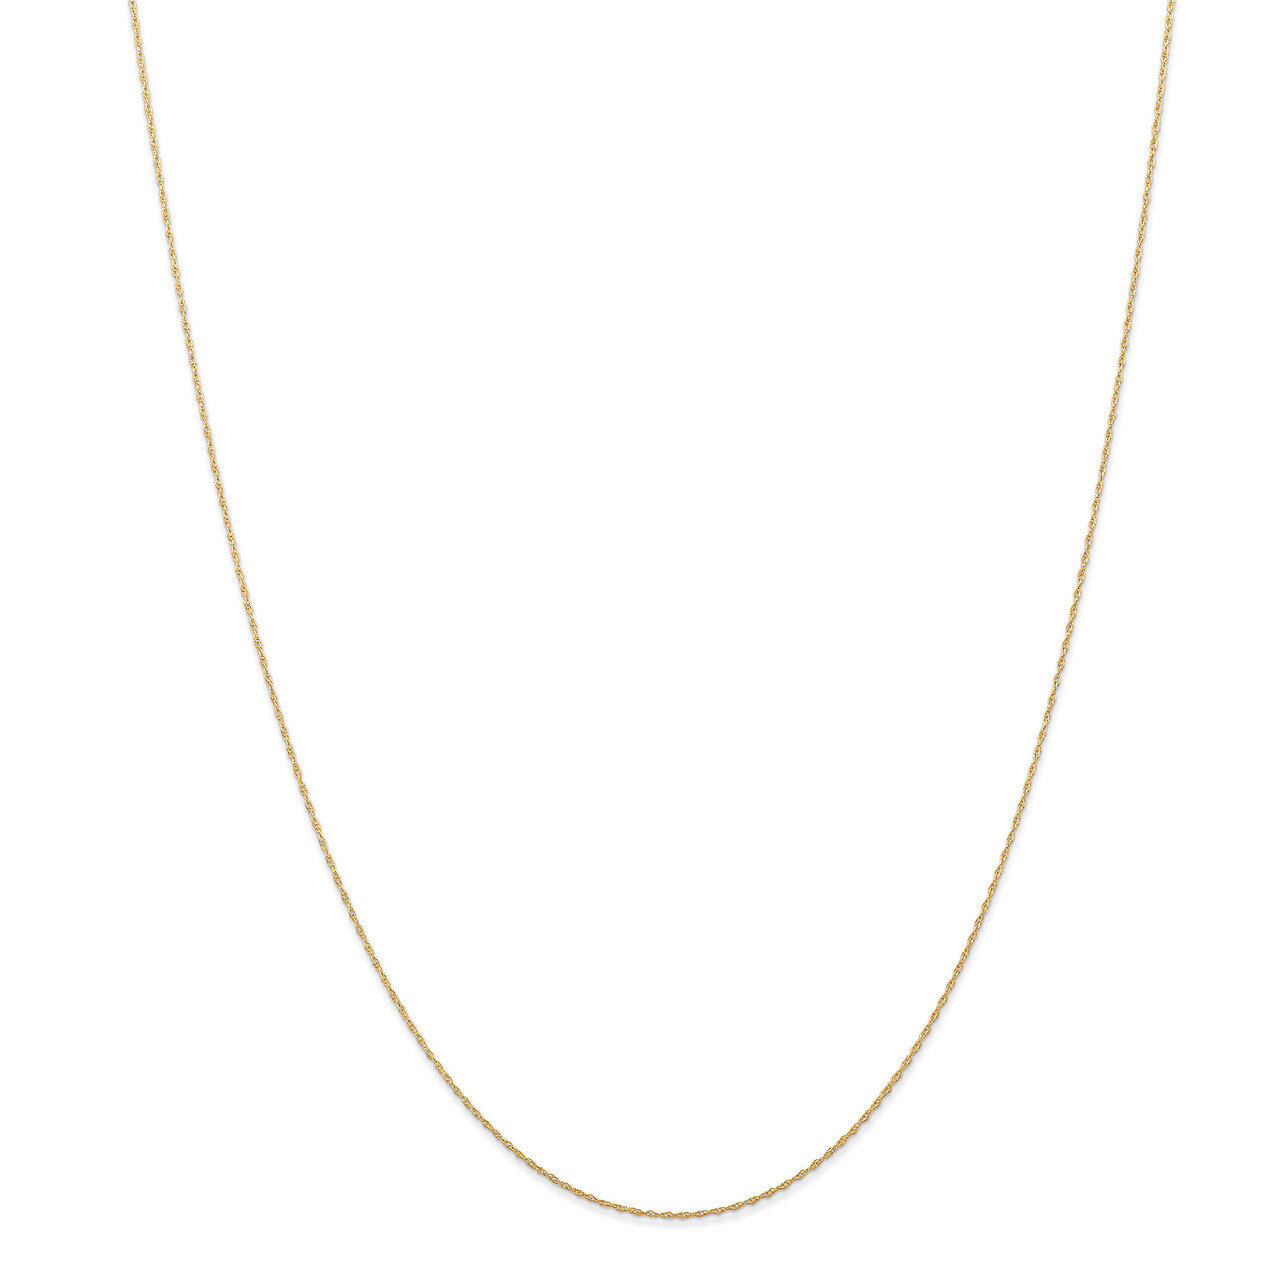 13 Inch 0.5 mm Carded Cable Rope Chain 14k Gold 5RY-13